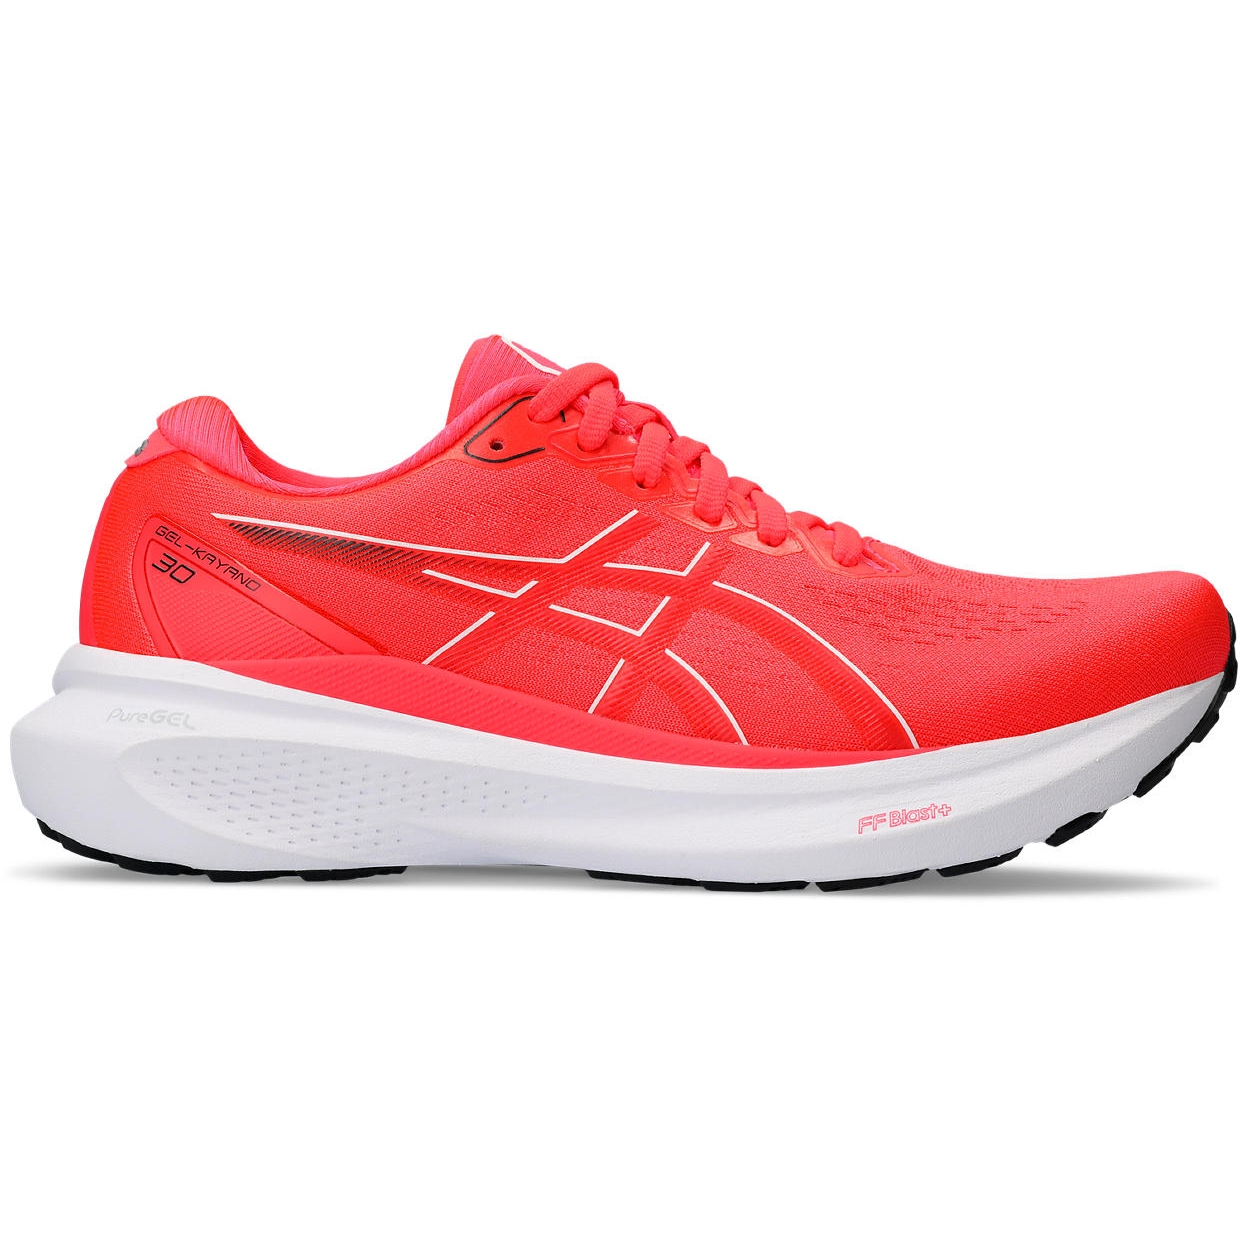 Picture of asics GEL-Kayano 30 Running Shoes Women - diva pink/electric red